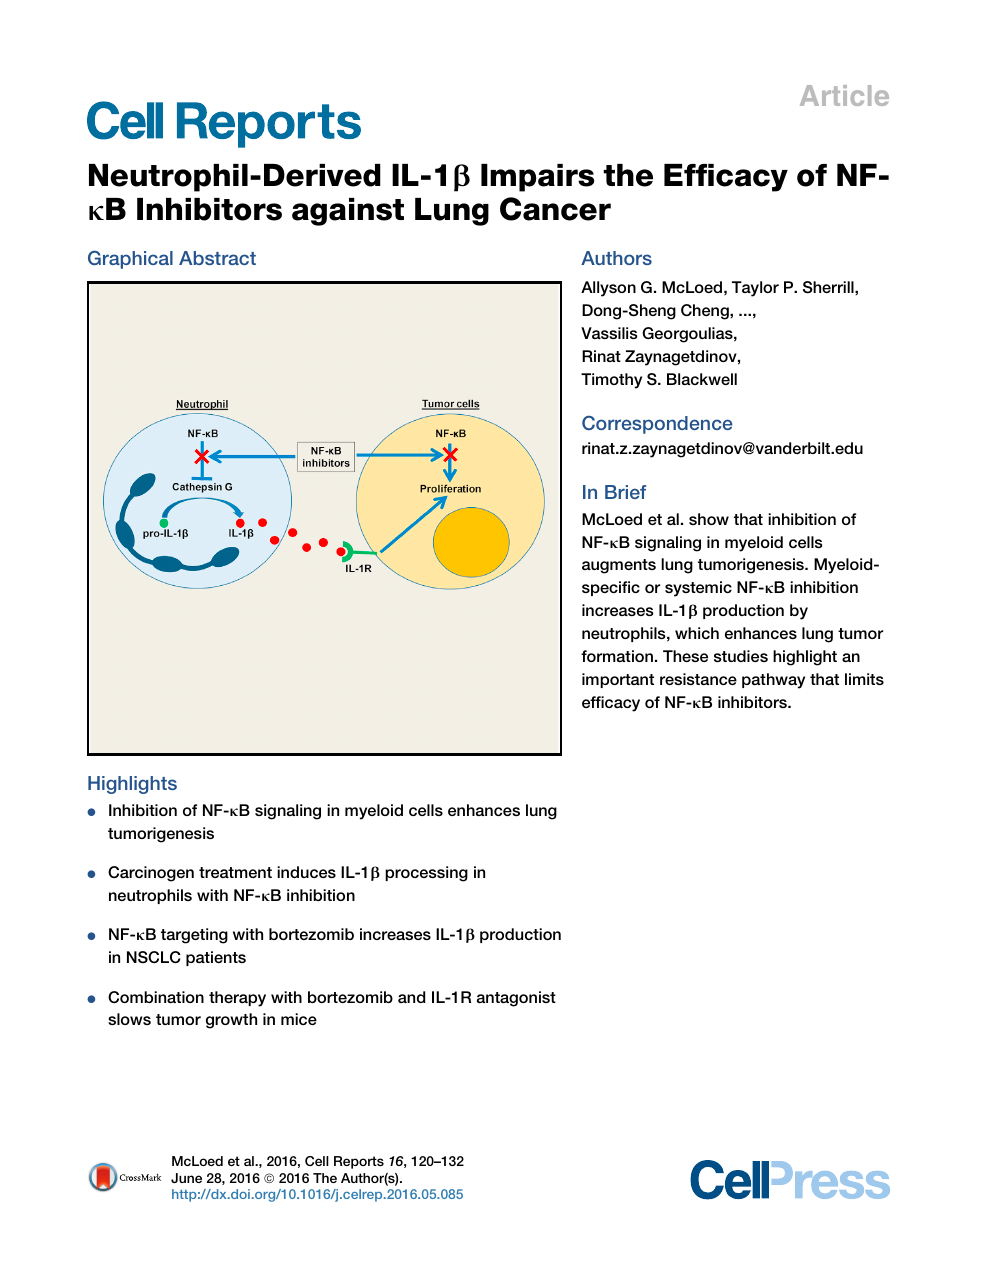 Neutrophil Derived Il 1b Impairs The Efficacy Of Nf Kb Inhibitors Against Lung Cancer Topic Of Research Paper In Biological Sciences Download Scholarly Article Pdf And Read For Free On Cyberleninka Open Science Hub